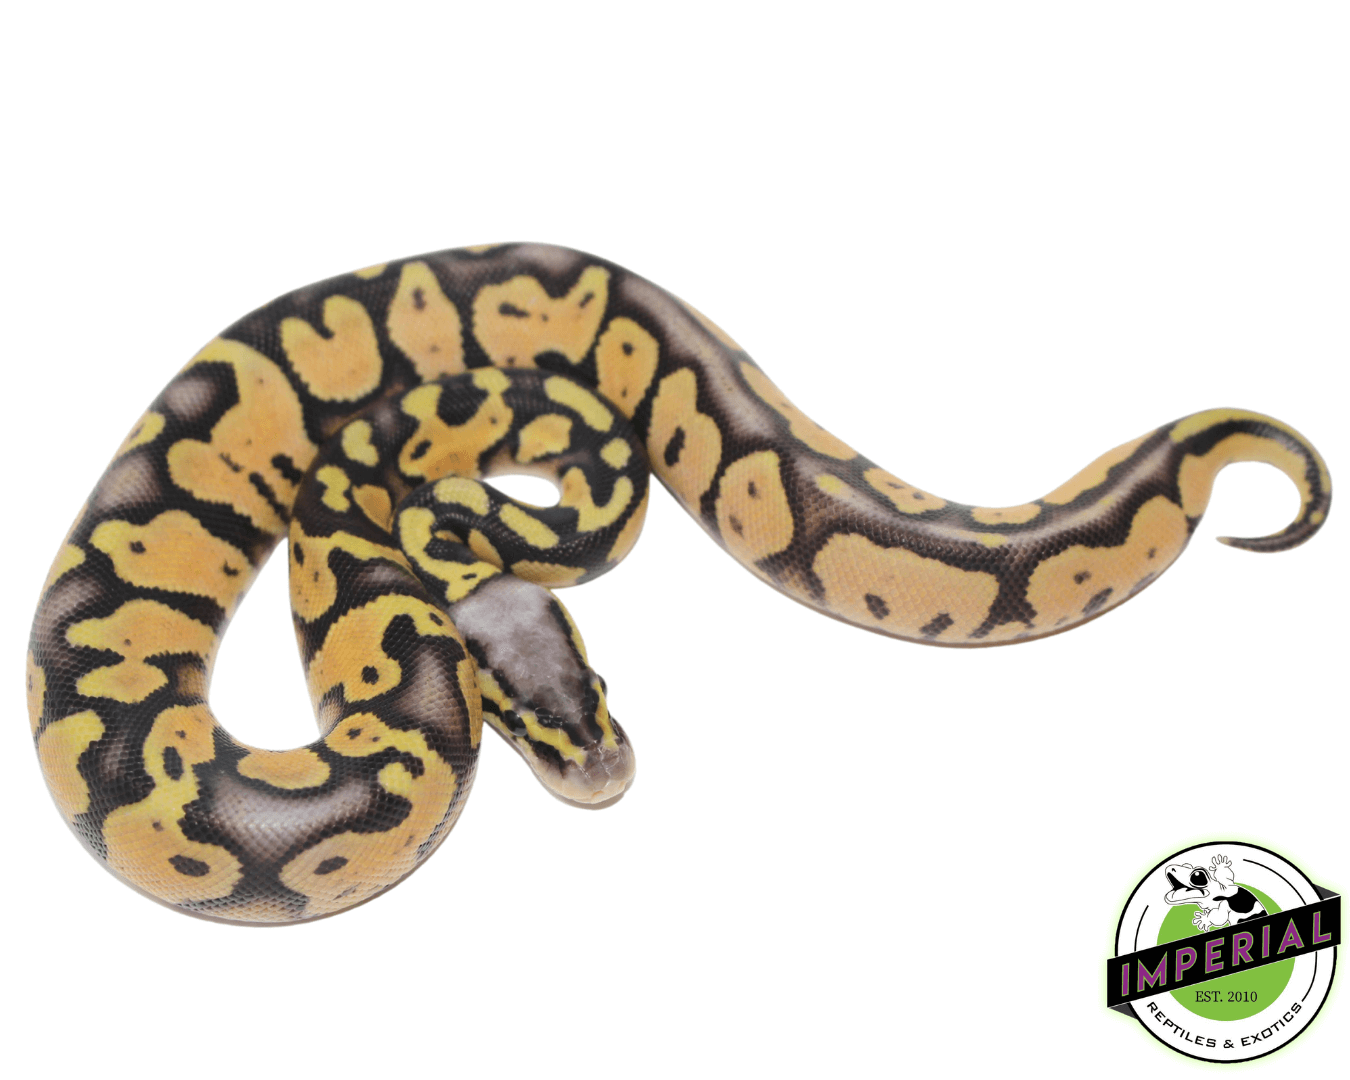 super pastel ball python for sale, buy reptiles online